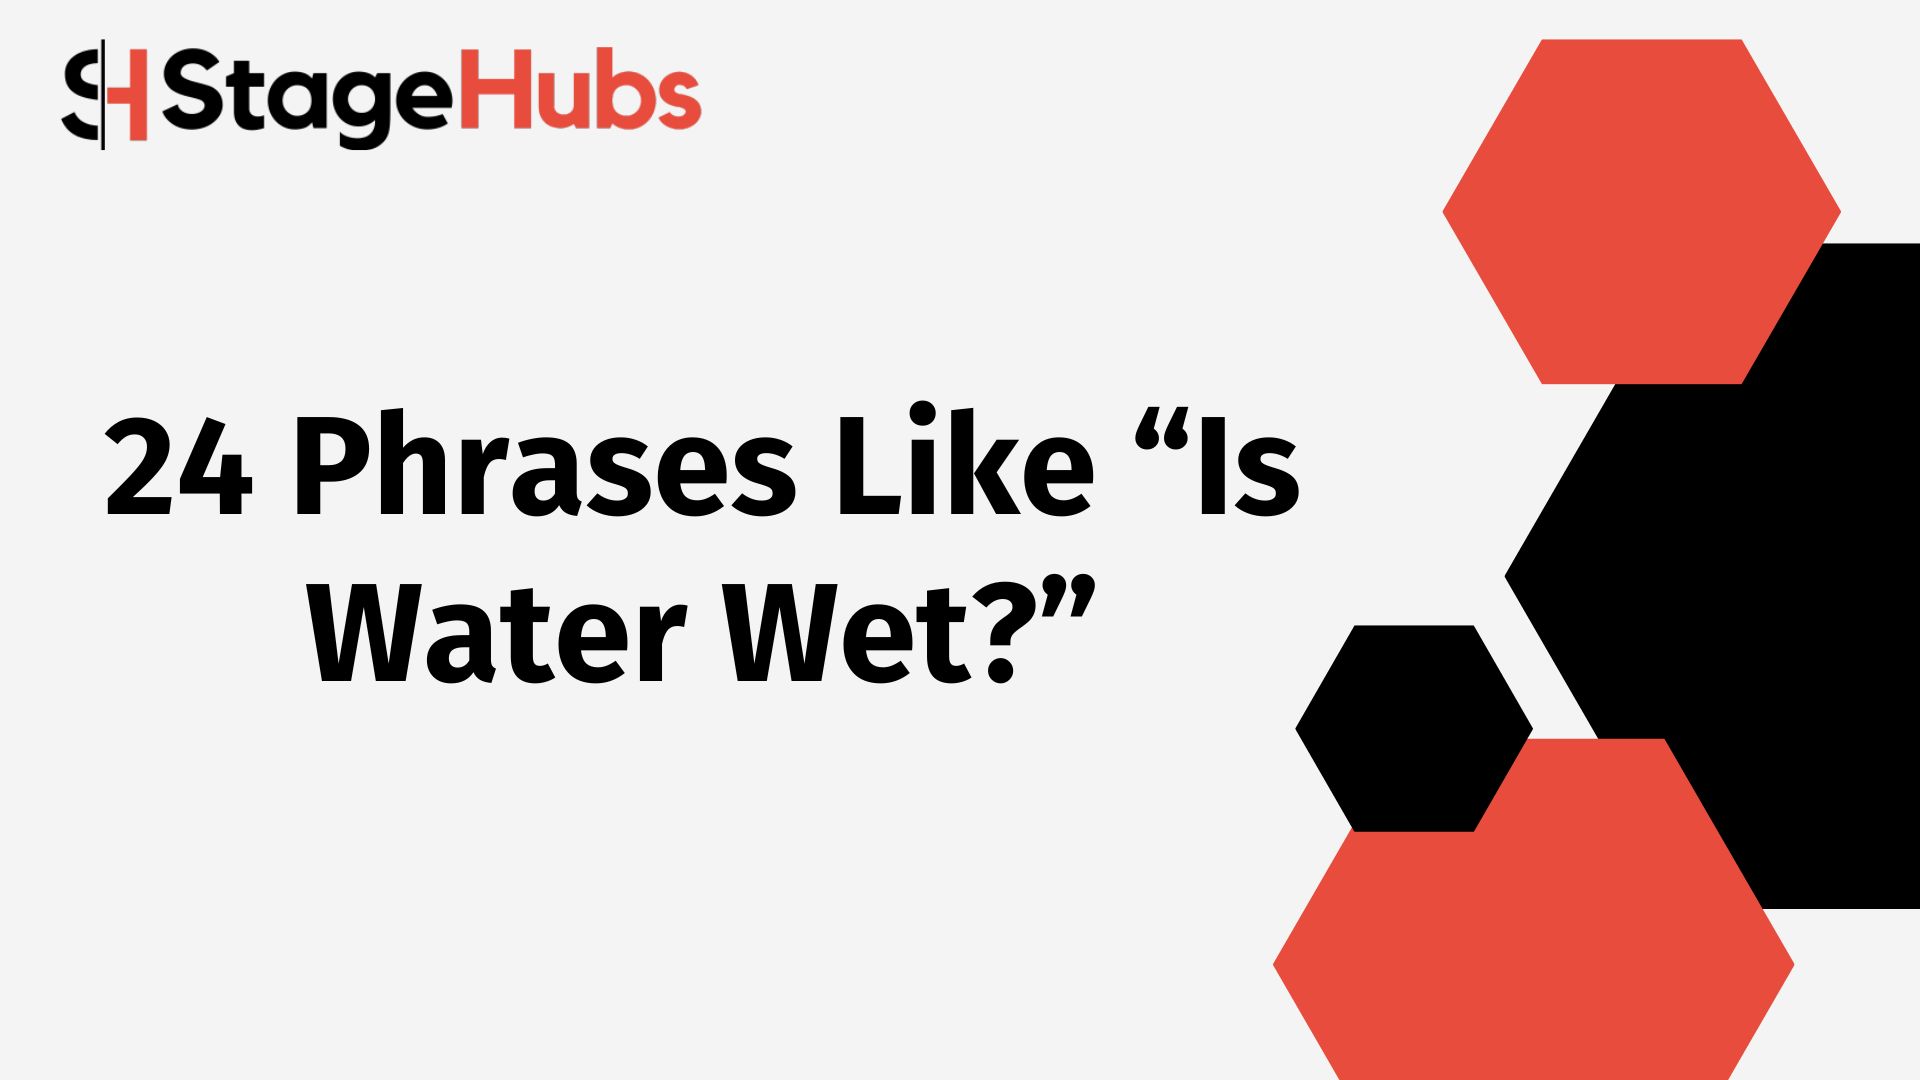 24 Phrases Like “Is Water Wet?”